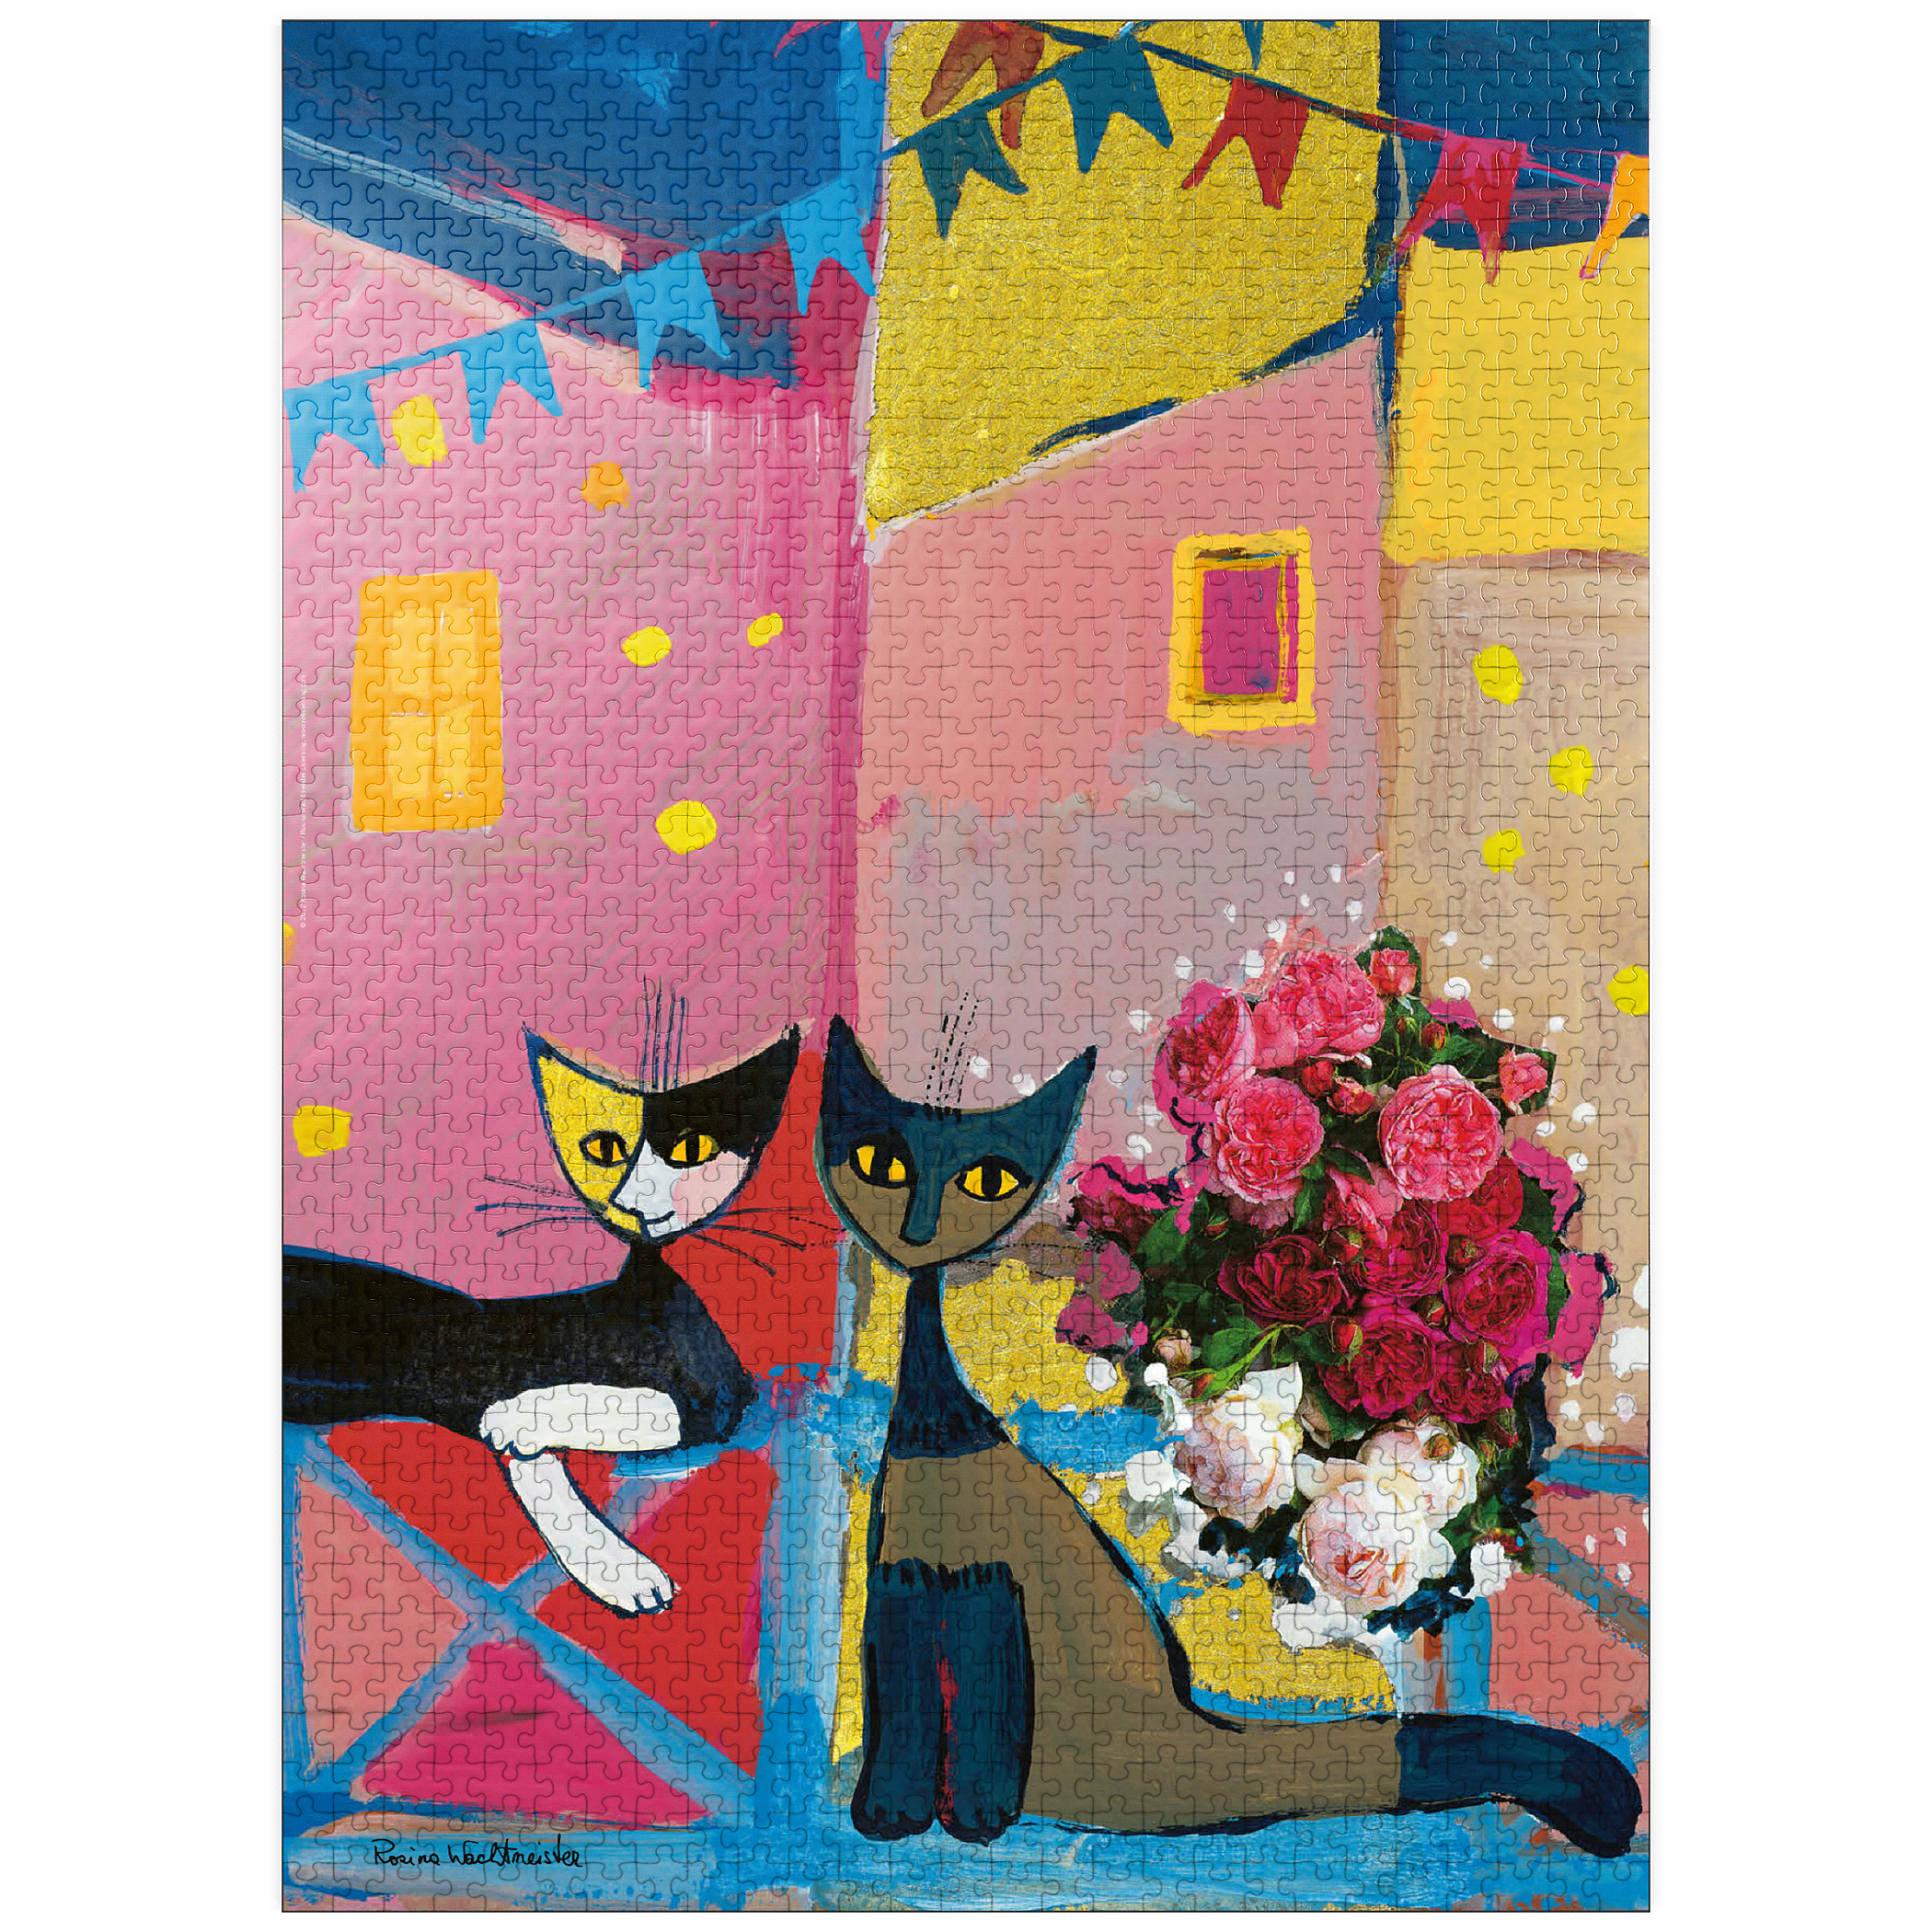 Posies - Rosina Wachtmeister – MyPuzzle.com USA